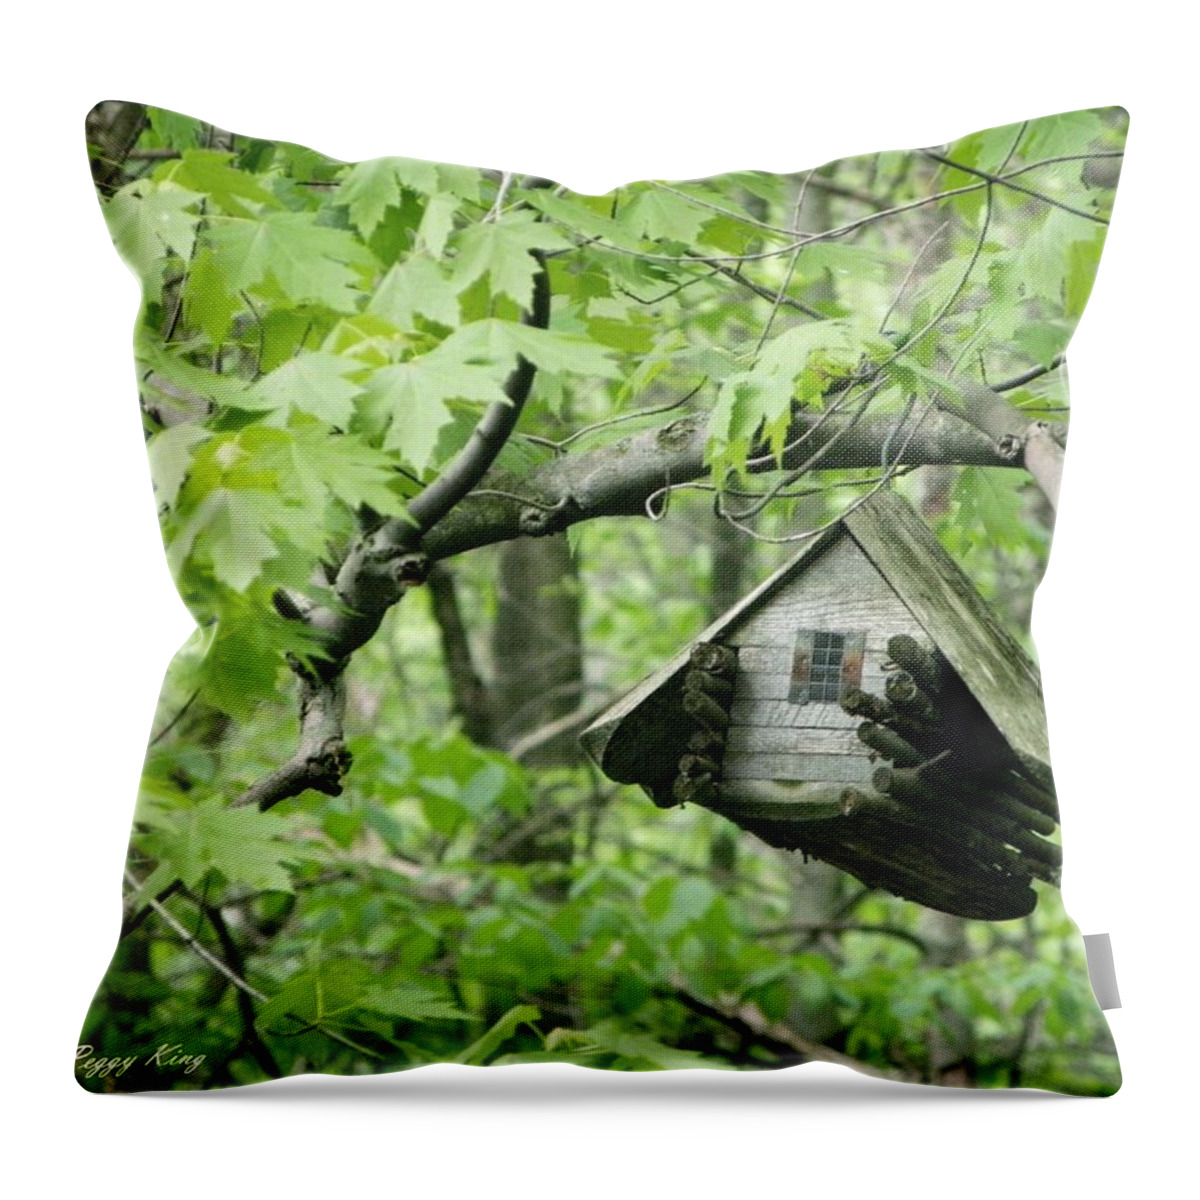 Woods Throw Pillow featuring the photograph Tree House by Peggy King